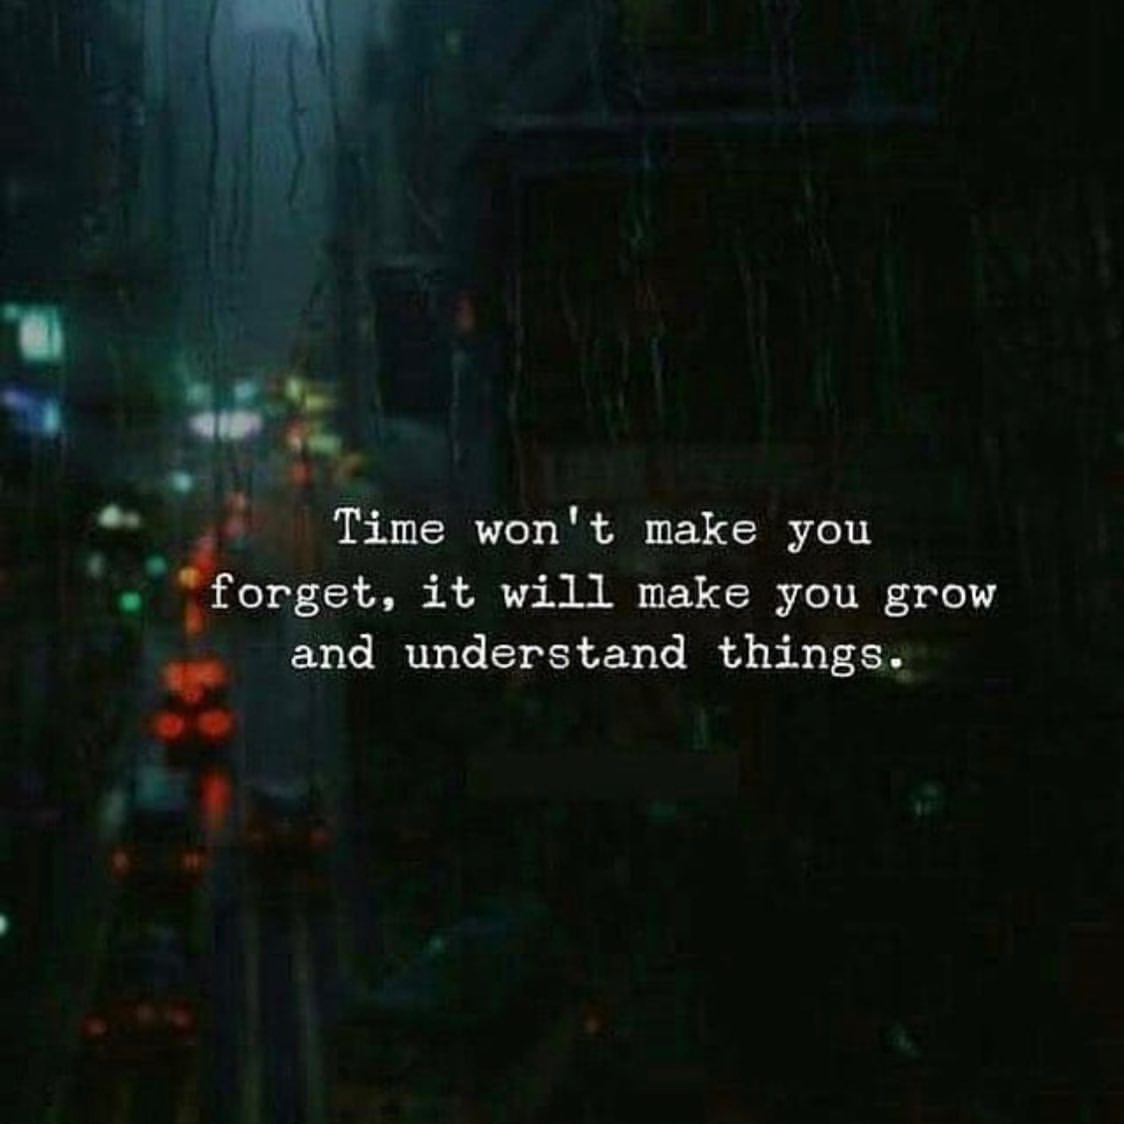 Time won't make you forget, it will make you grow and understand things.